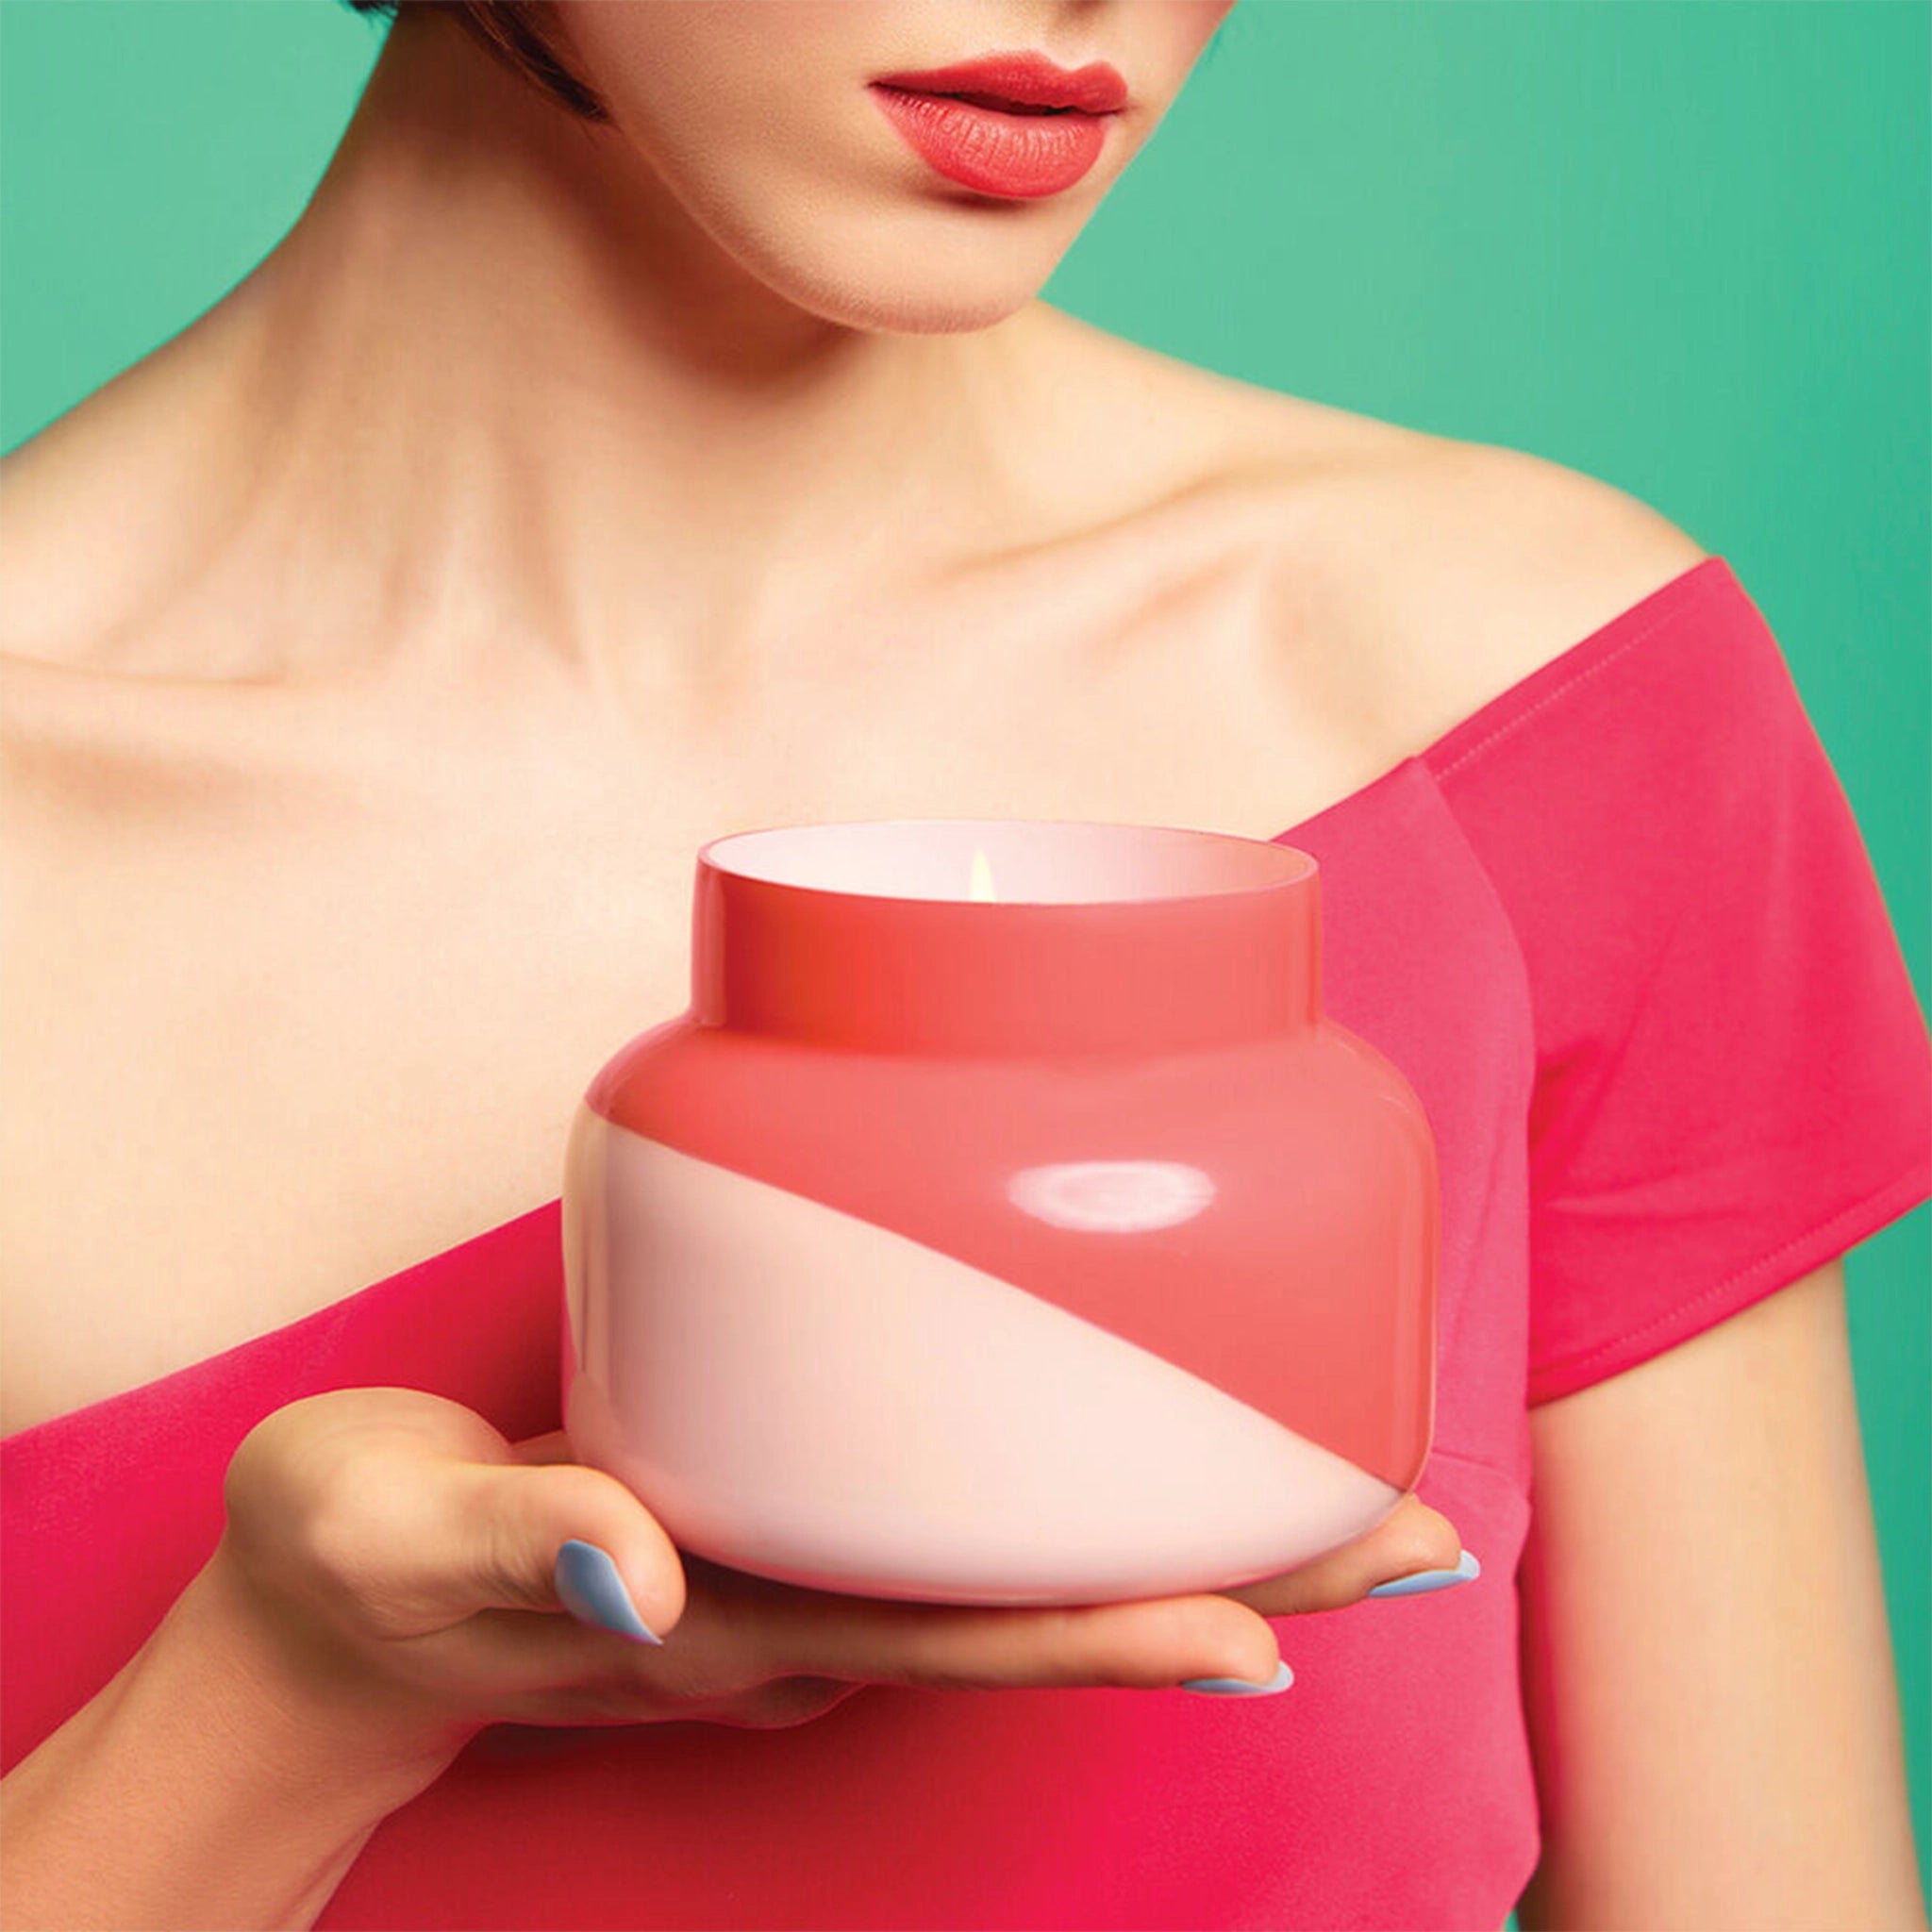 A glass candle jar with a two toned design featuring a light pink and a darker pink that is split diagonally being held by a model wearing a hot pink off the shoulder dress.